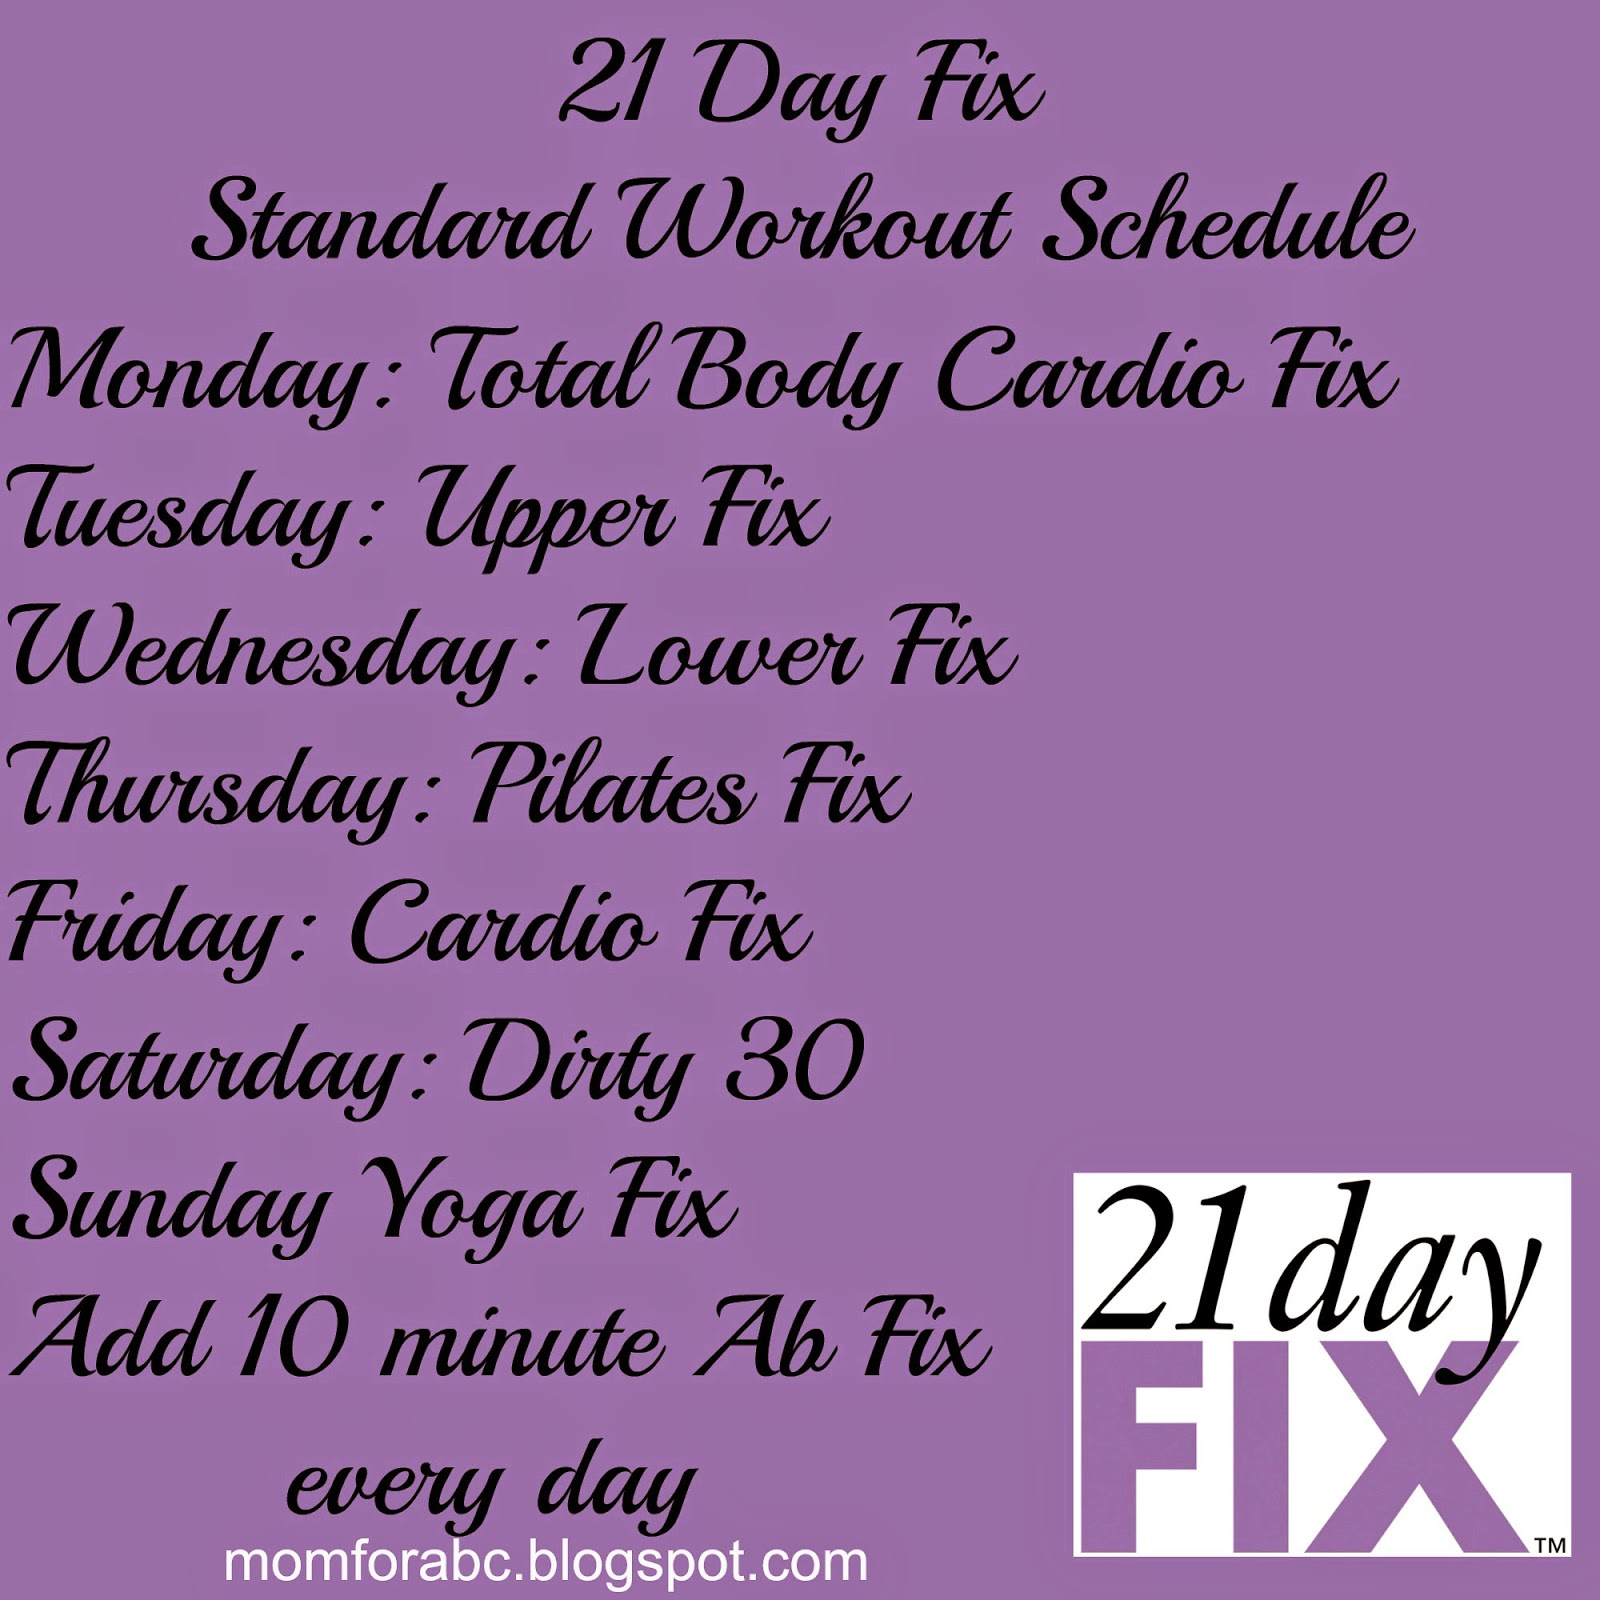 The Transformation of Mom 4 ABCD: 21 Day Fix Workout Descriptions